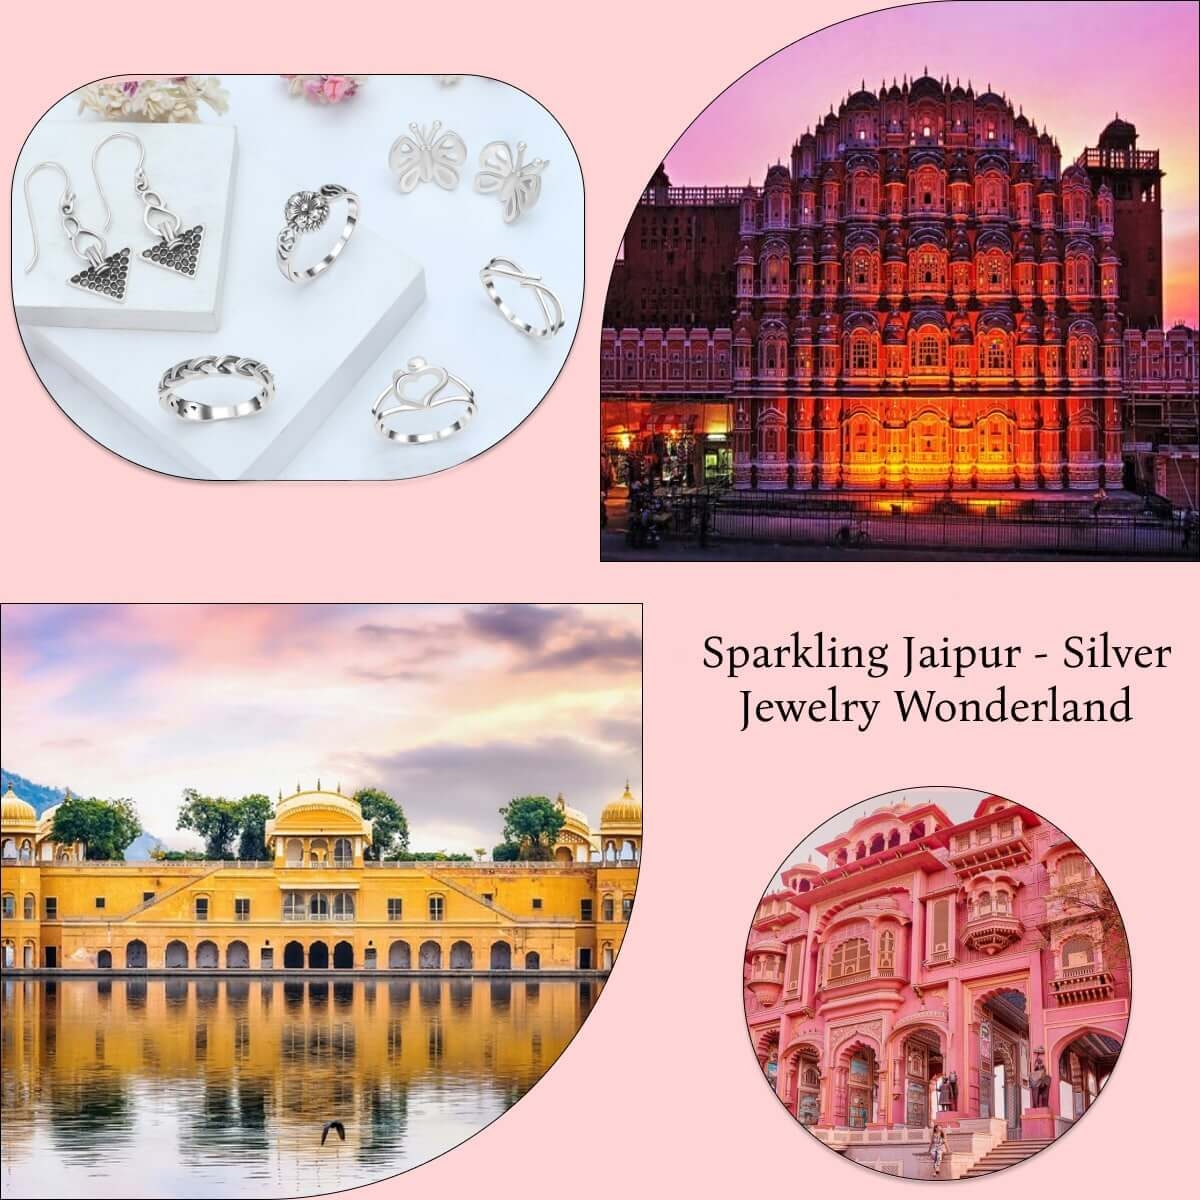 Shop for Handcrafted Silver Jewelry in Jaipur